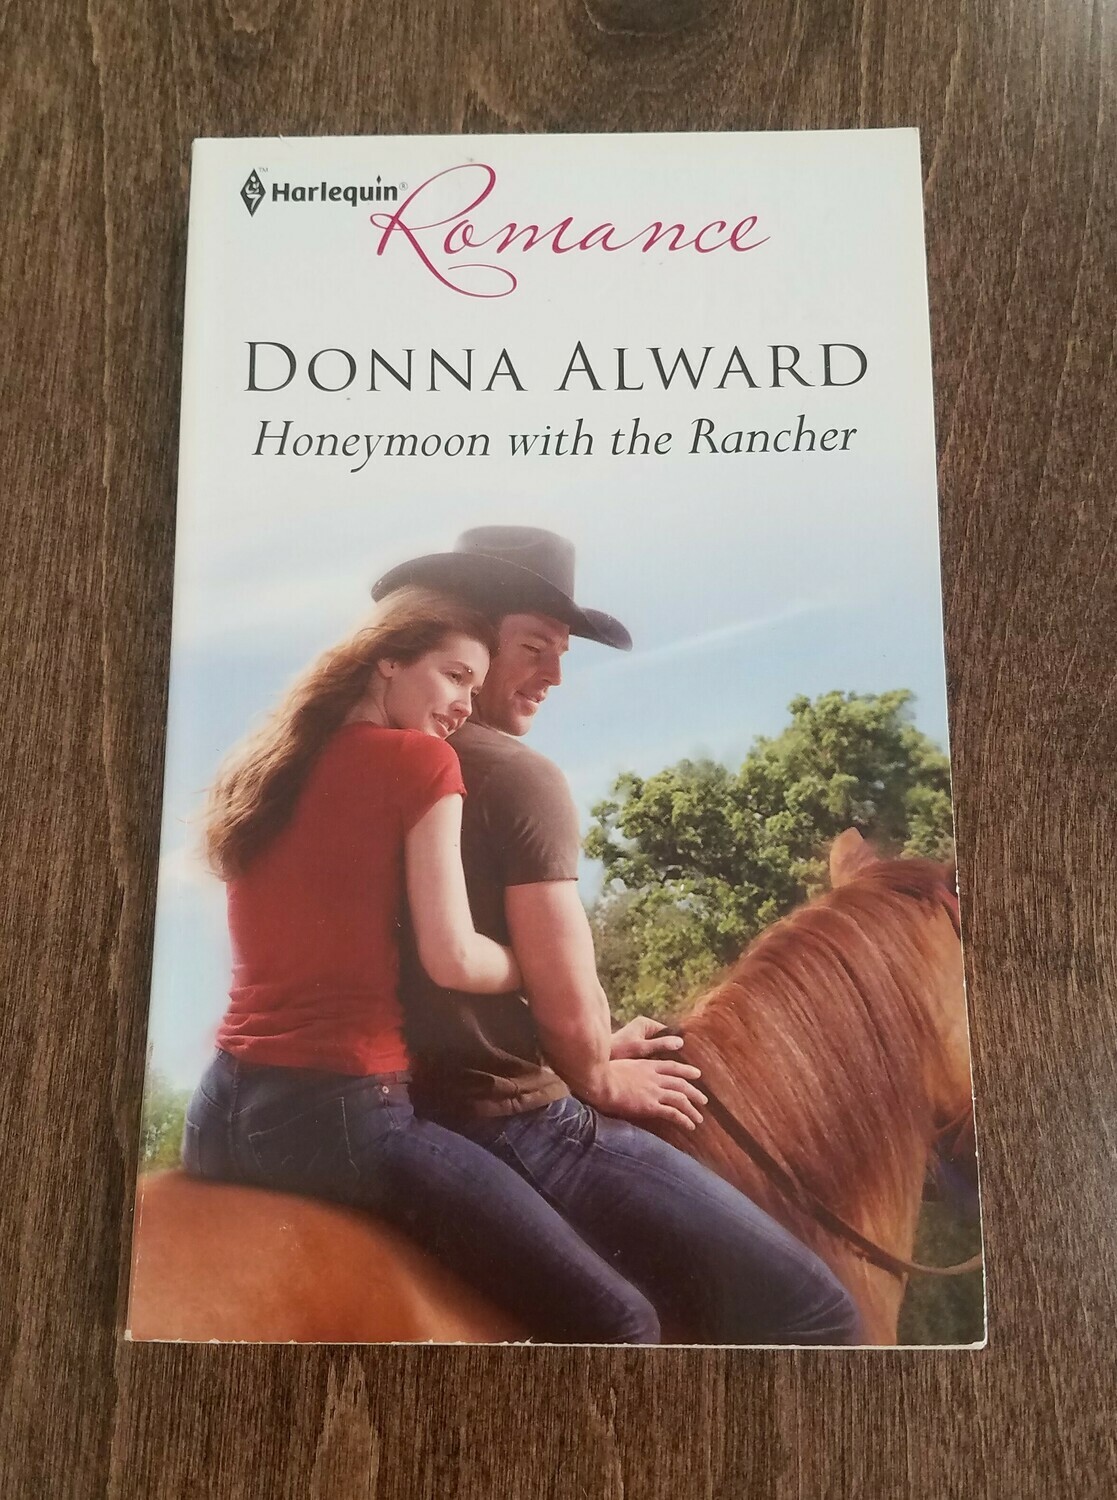 Honeymoon with the Rancher by Donna Alward